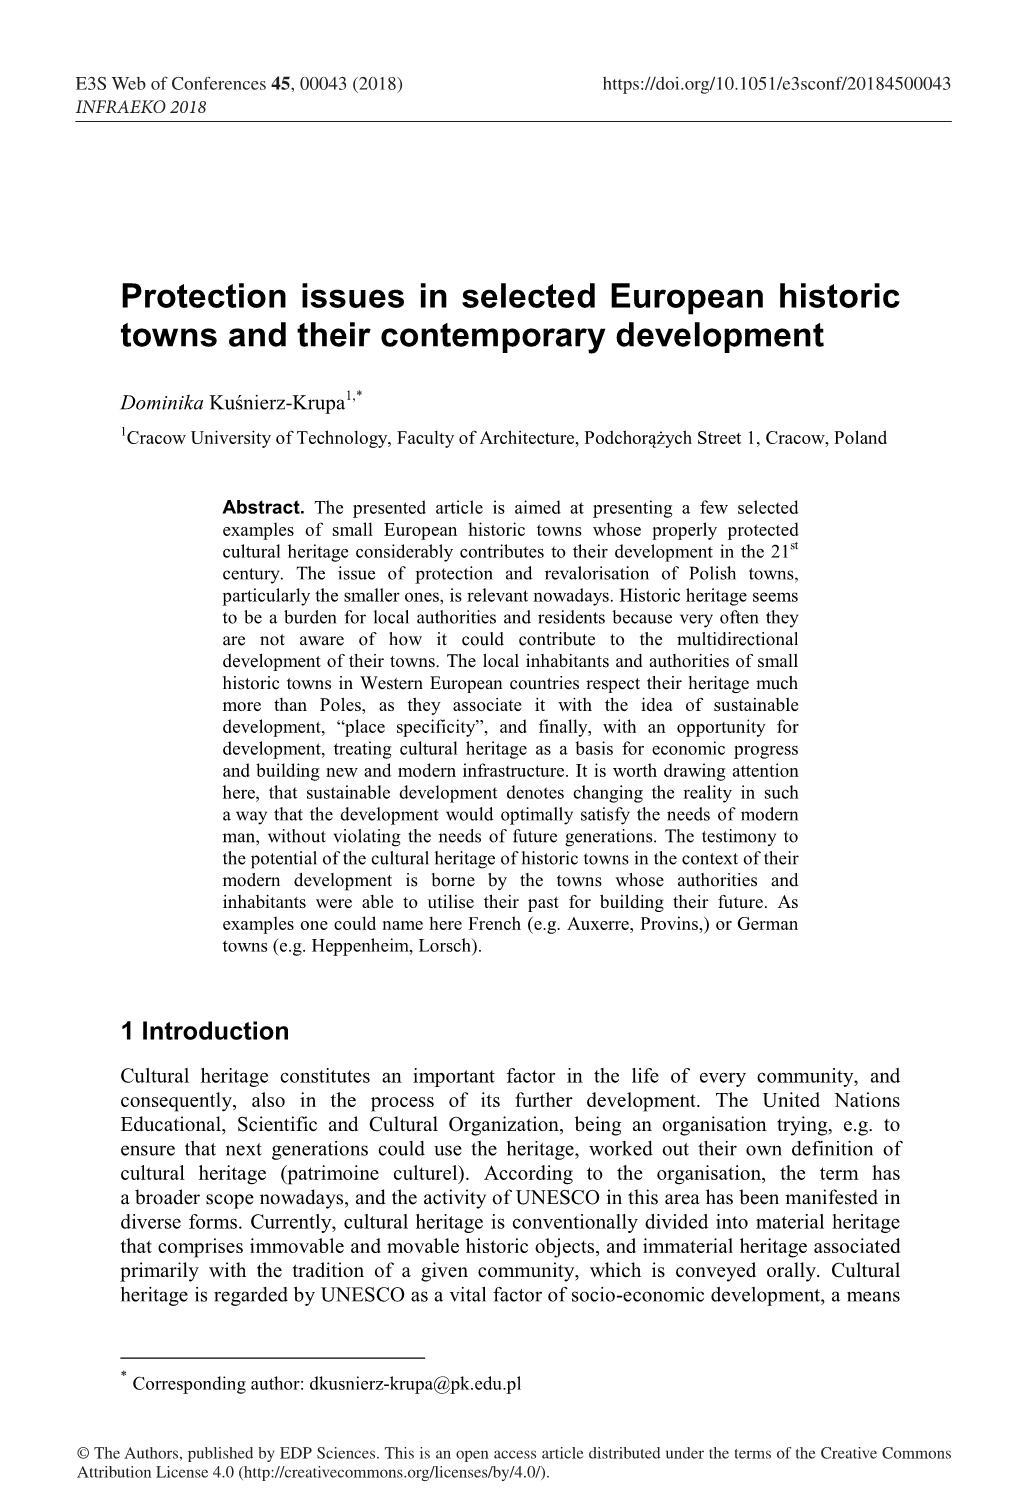 Protection Issues in Selected European Historic Towns and Their Contemporary Development